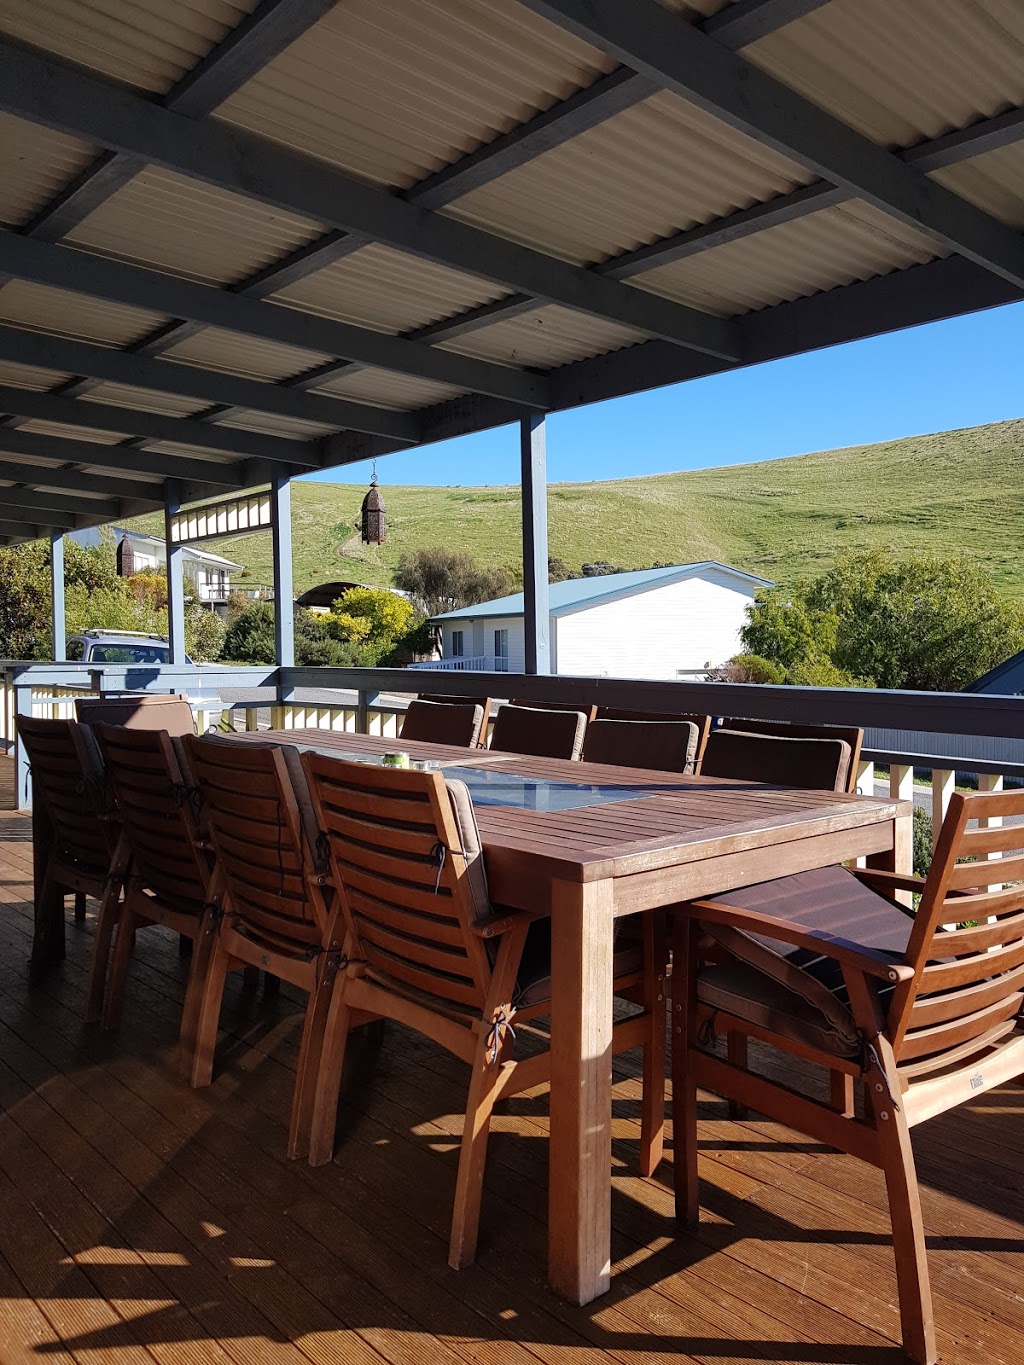 Sea-n-Hills Accommodation @ Second Valley | lodging | 12 Seacove Cres, Second Valley SA 5204, Australia | 0490057253 OR +61 490 057 253